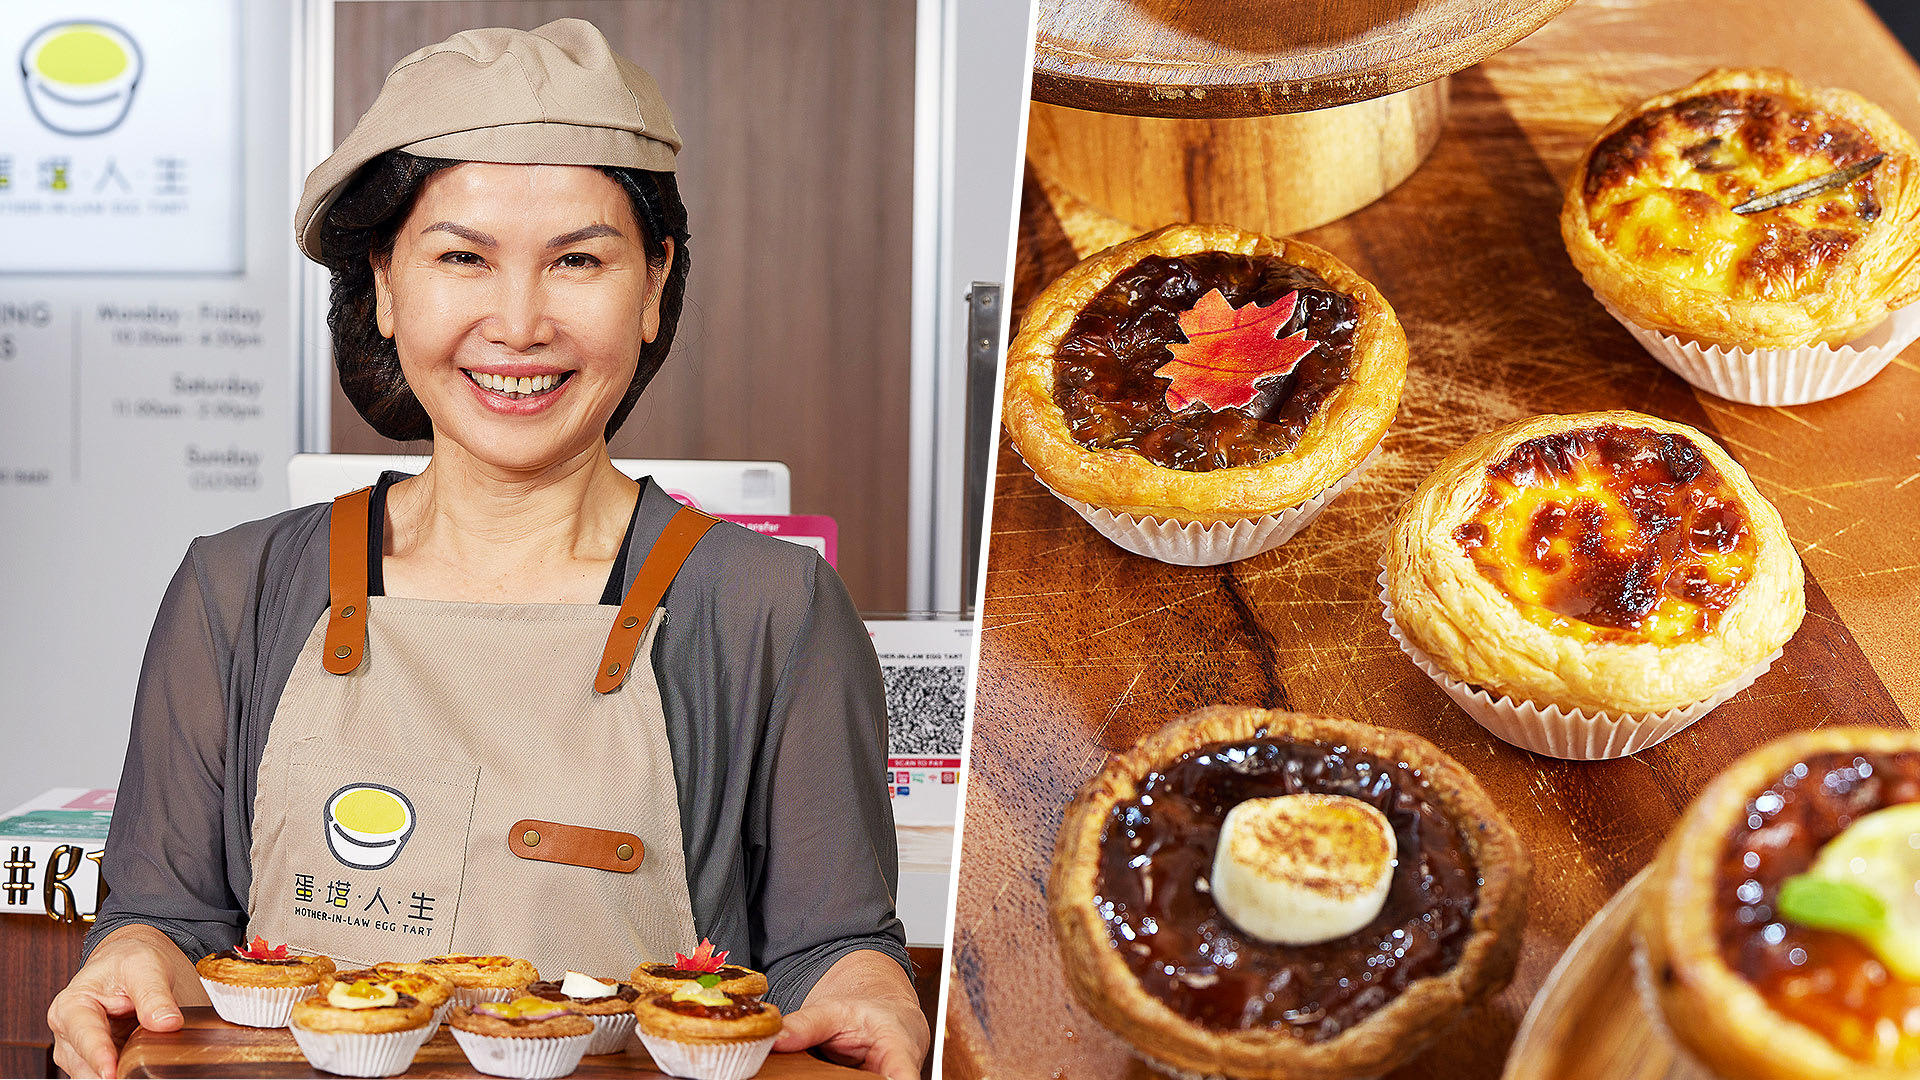 Fusion Portuguese Egg Tarts In Flavours Like Sweet Potato By Hip “Mother-In-Law”